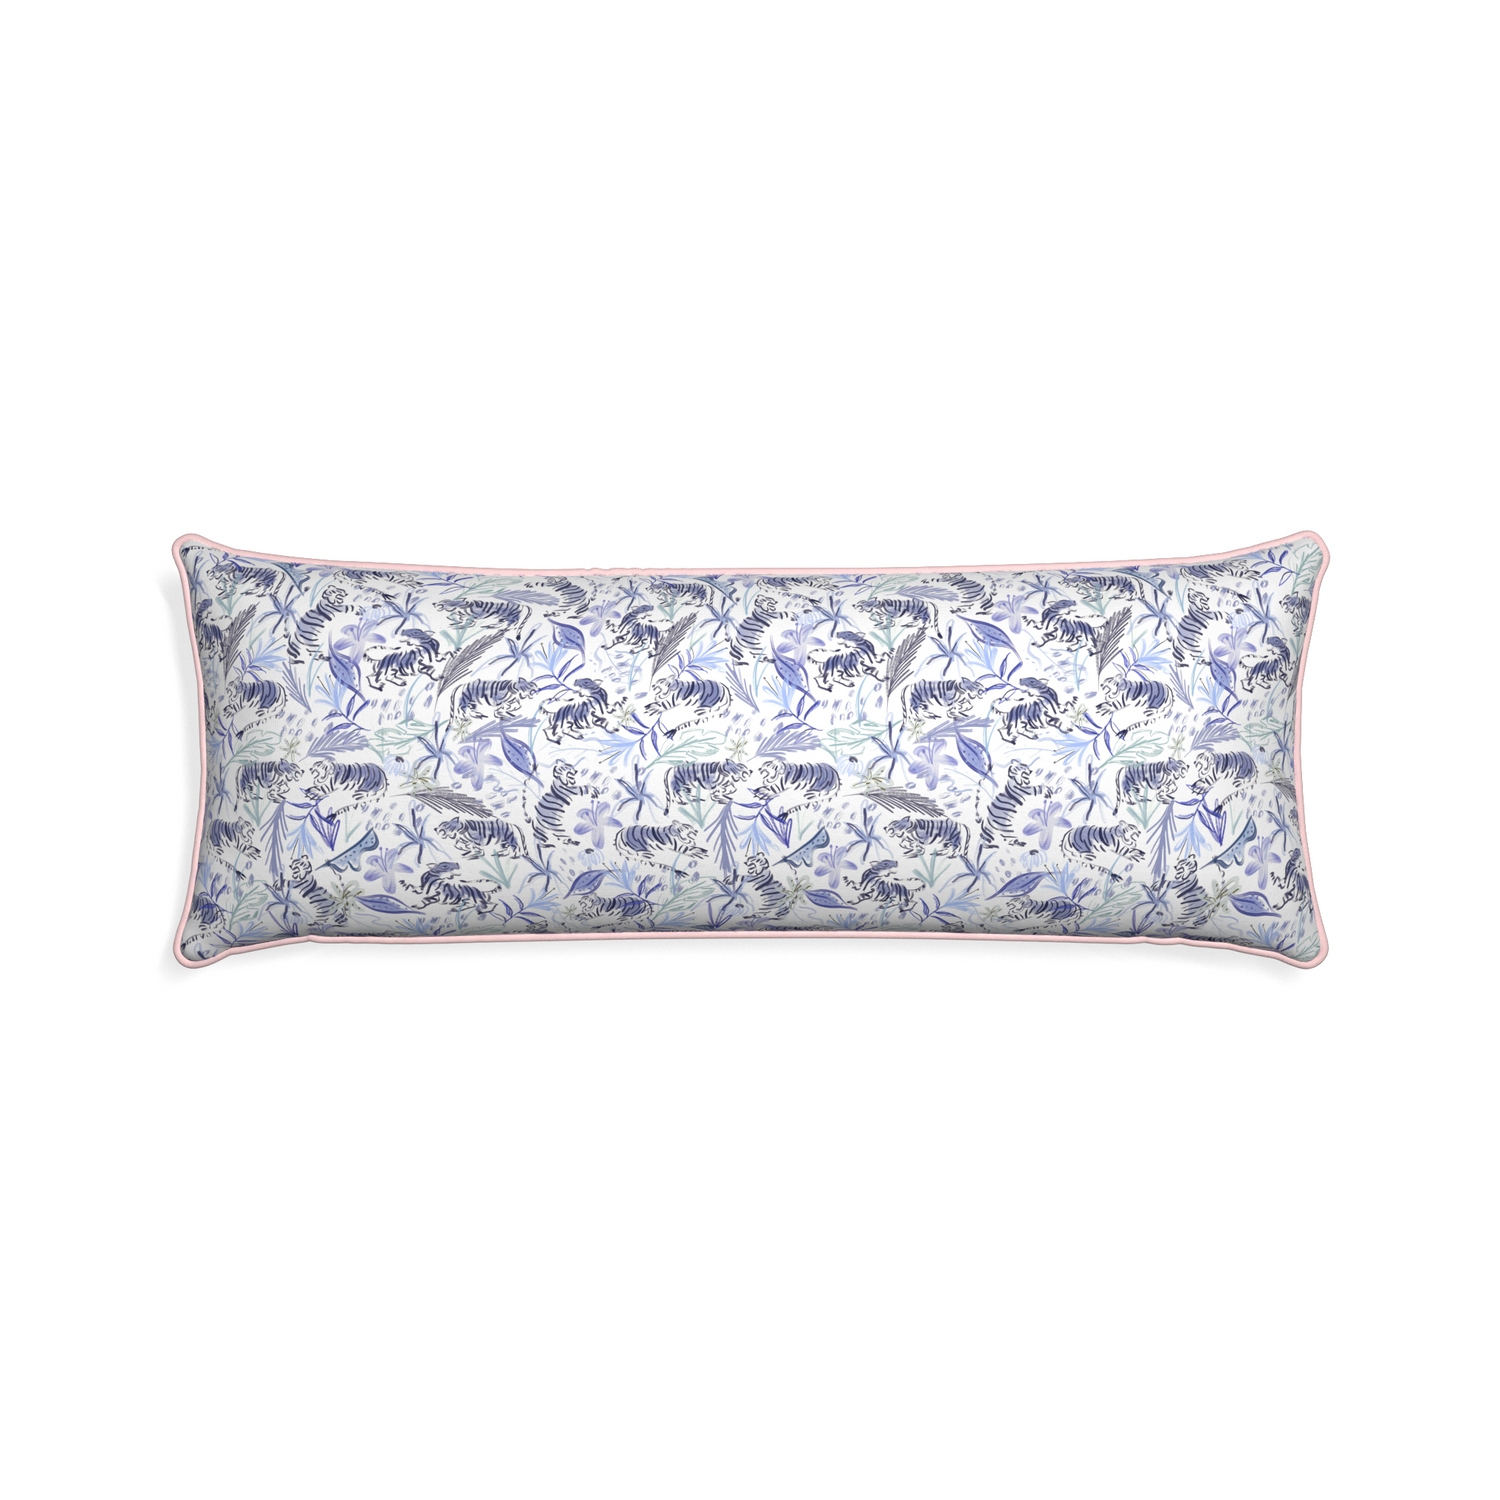 Xl-lumbar frida blue custom blue with intricate tiger designpillow with petal piping on white background